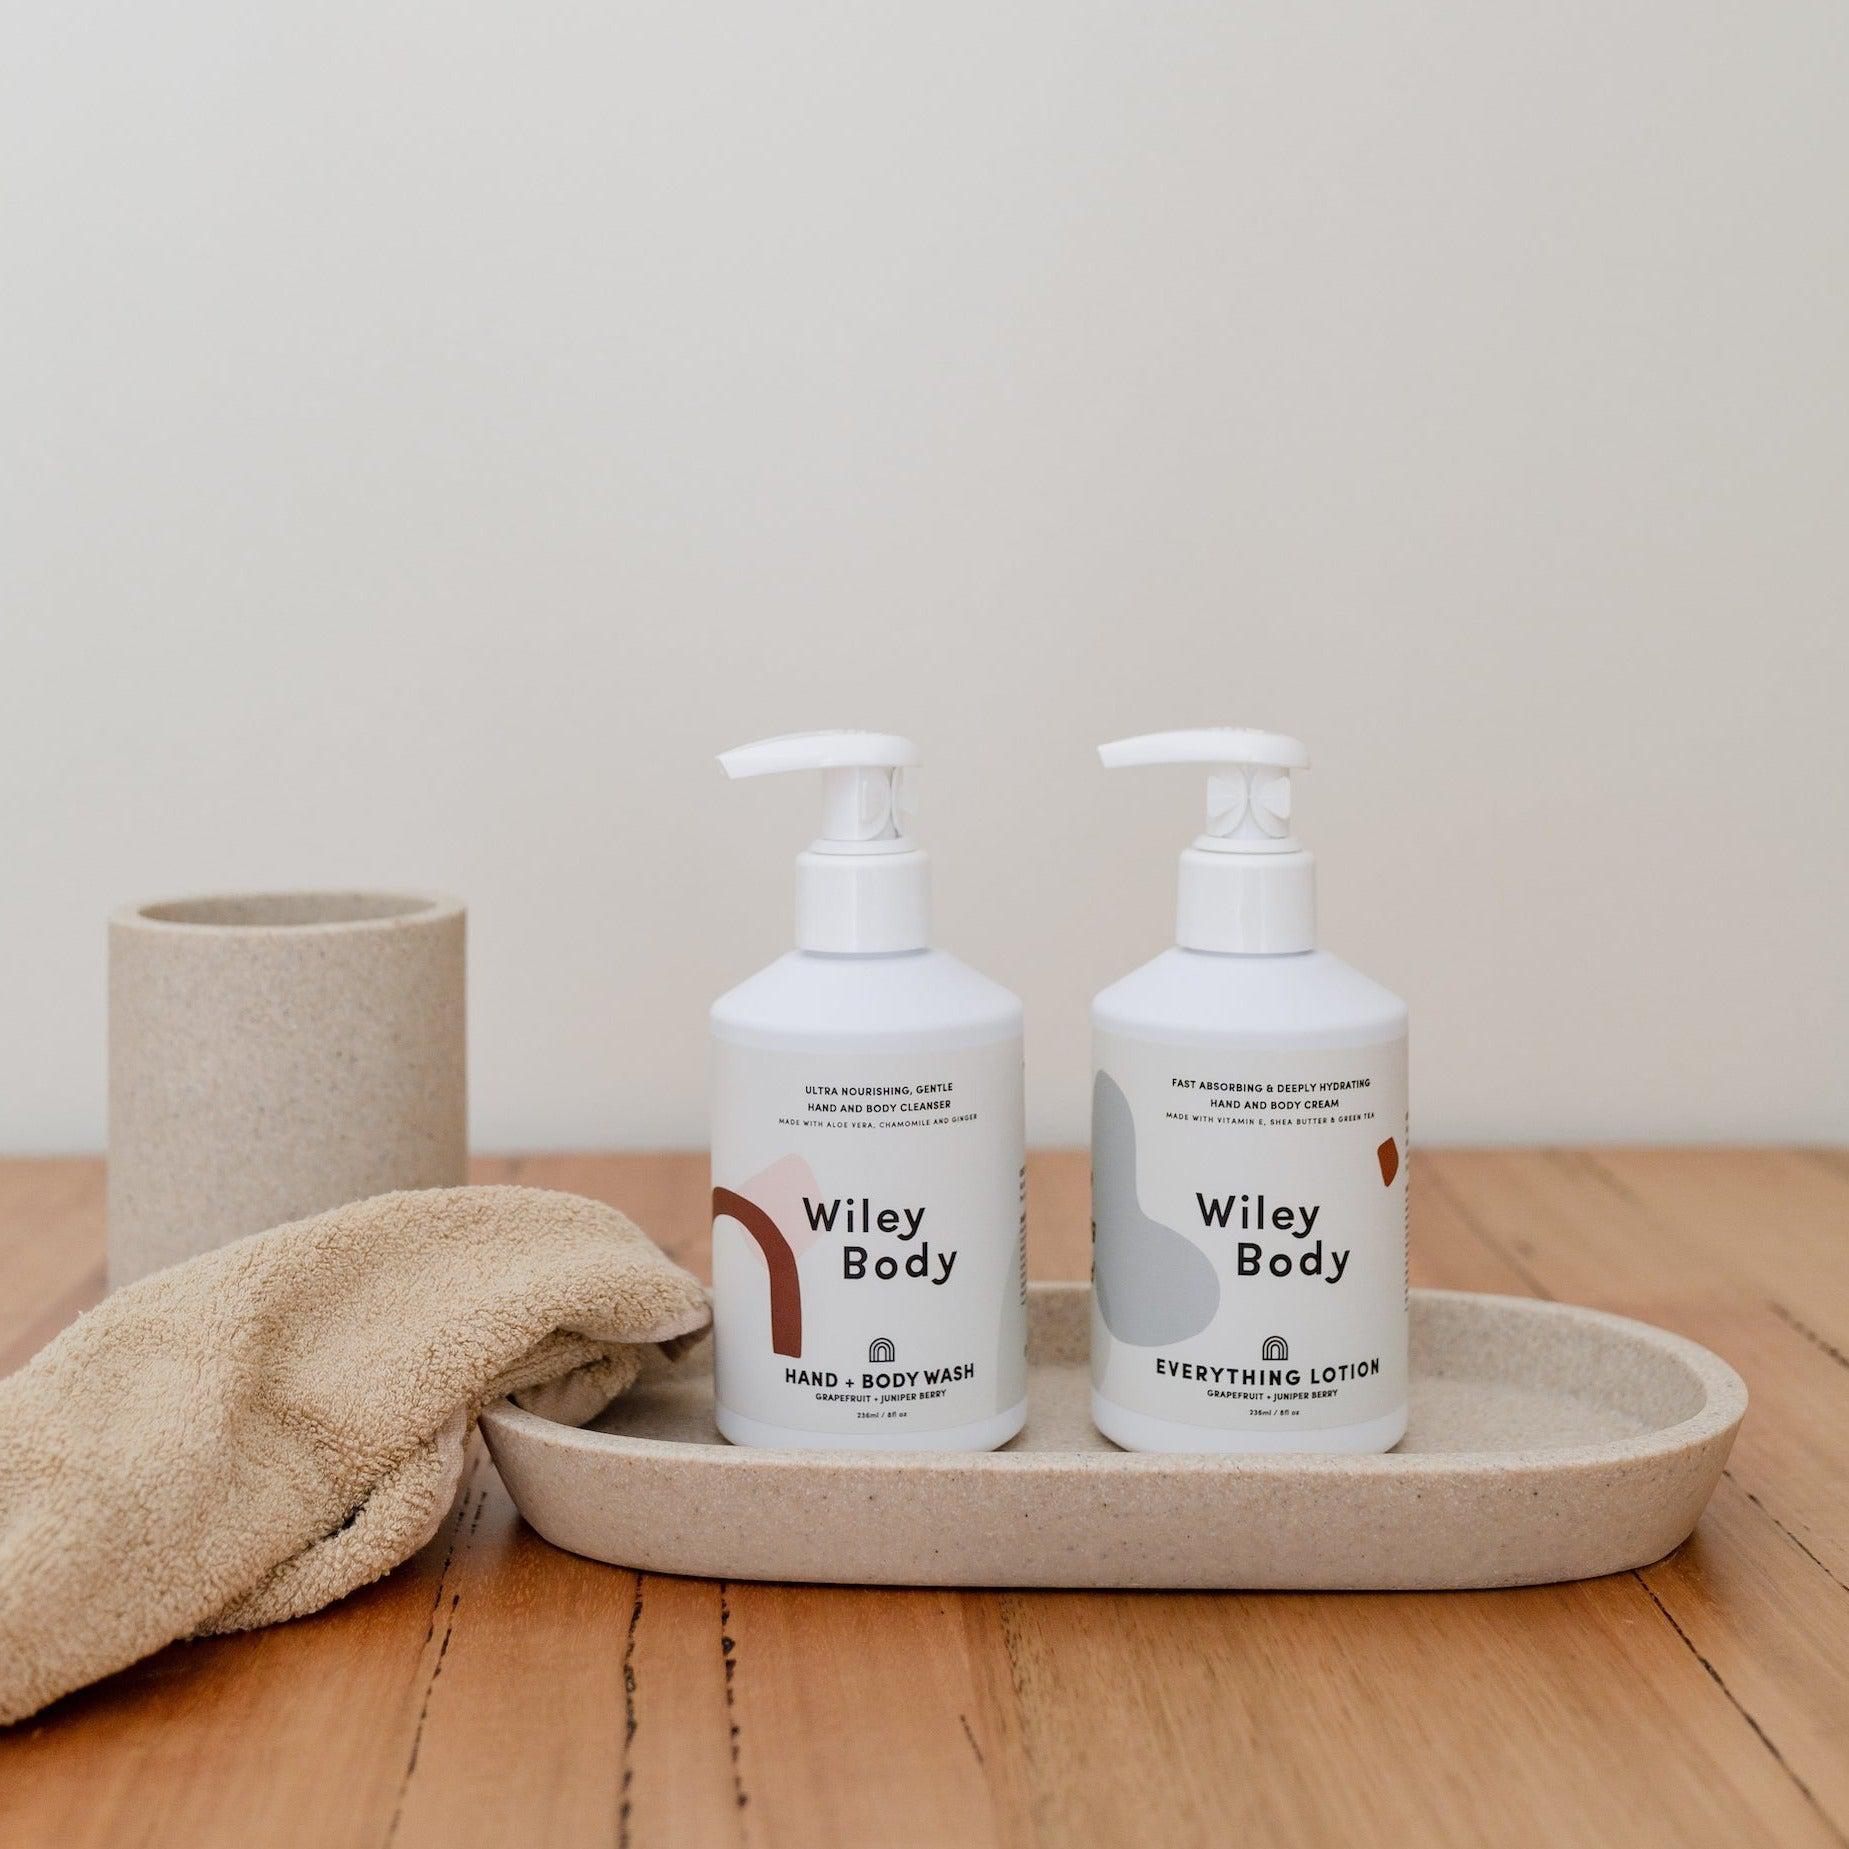 An organic aloe vera tray with a bottle of Wiley Body Hand & Body Wash and a towel.